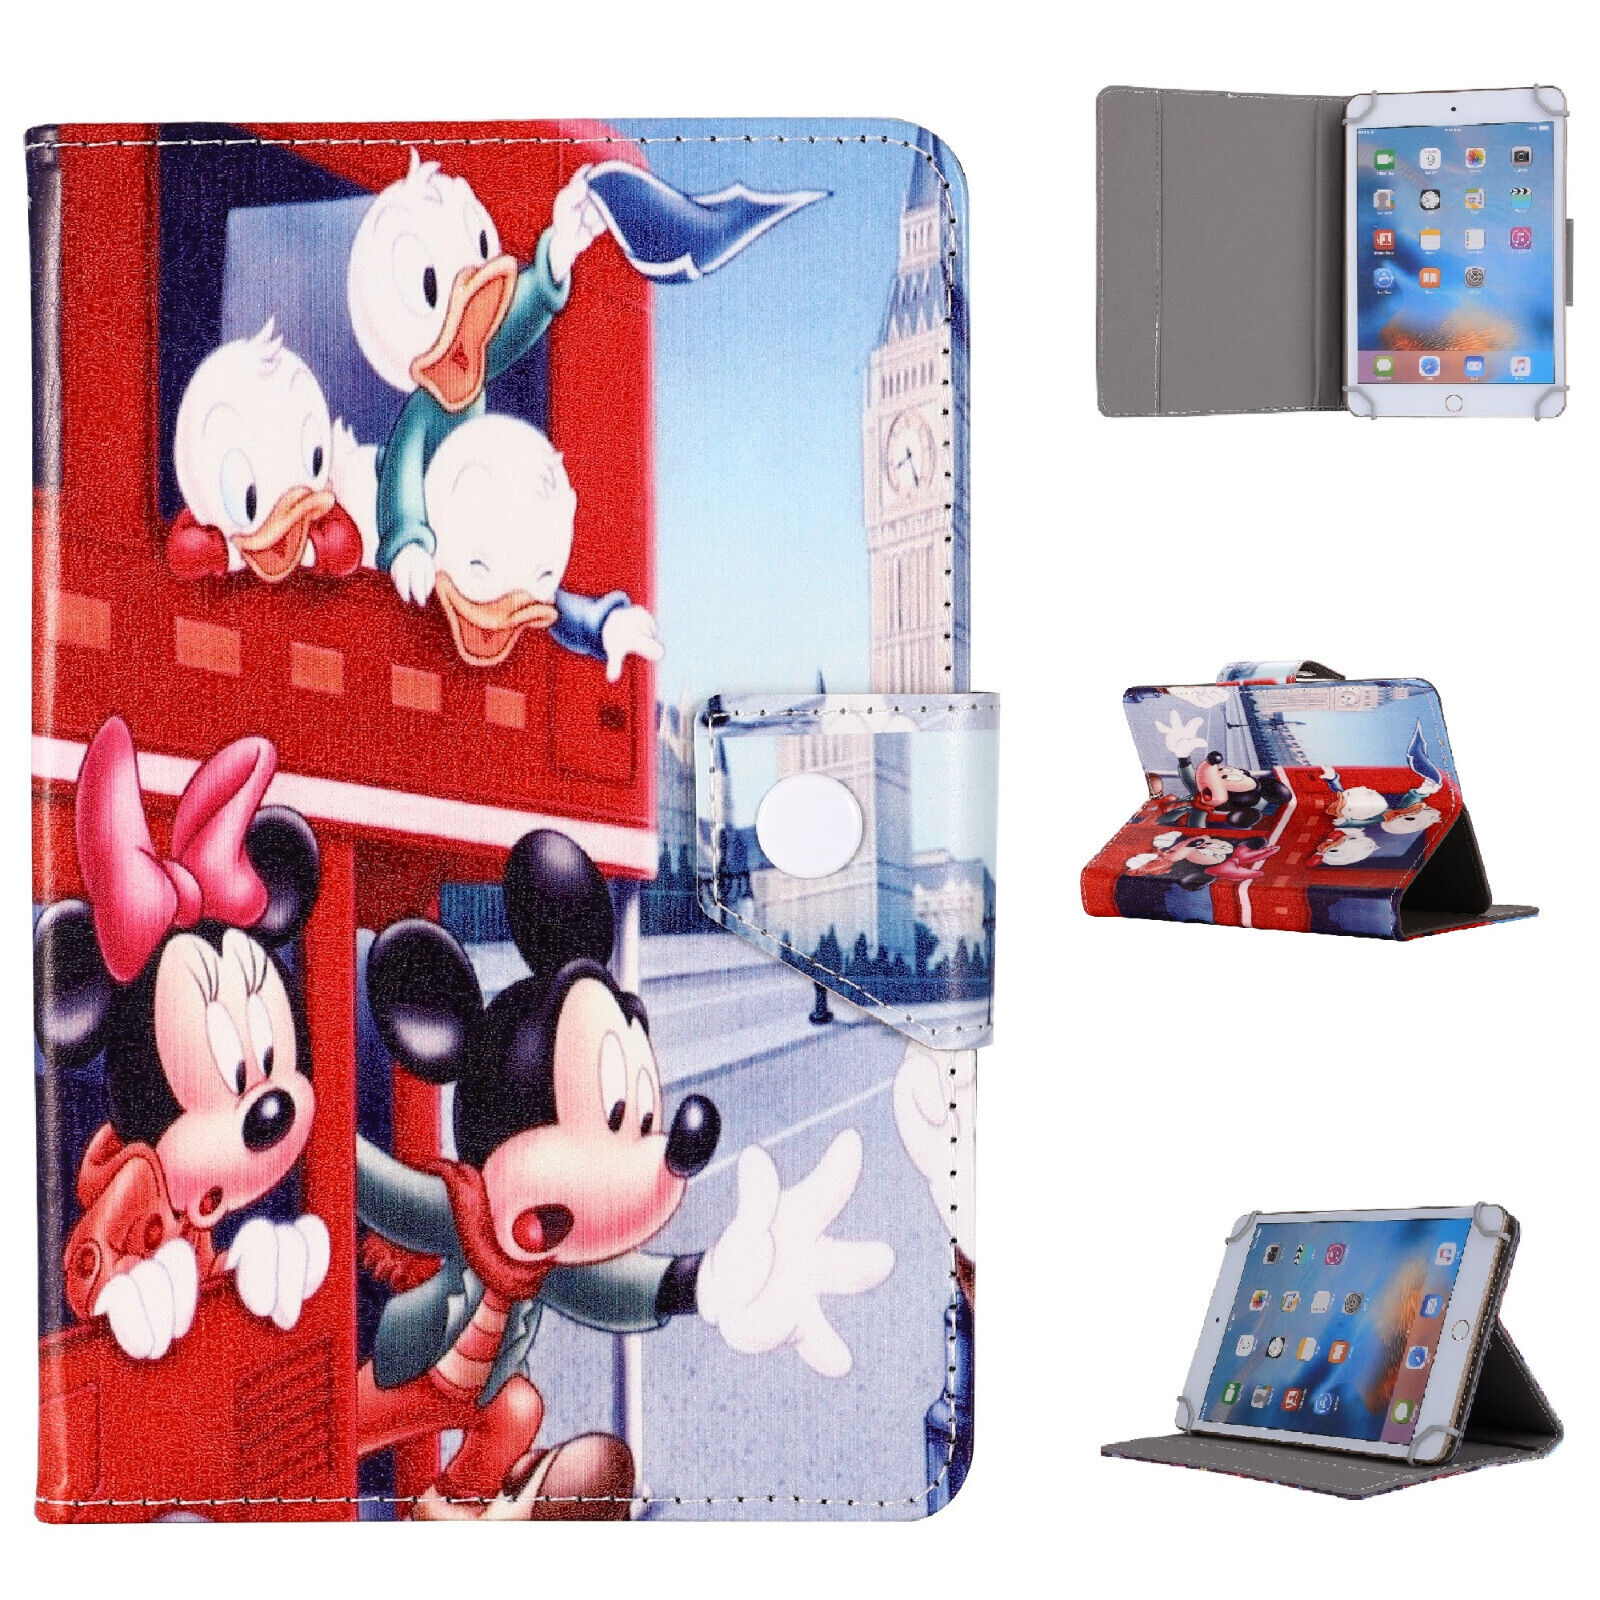 Case For Apple iPad all Models, Kids Stand cover ( boys & Girls) toddler cartoon